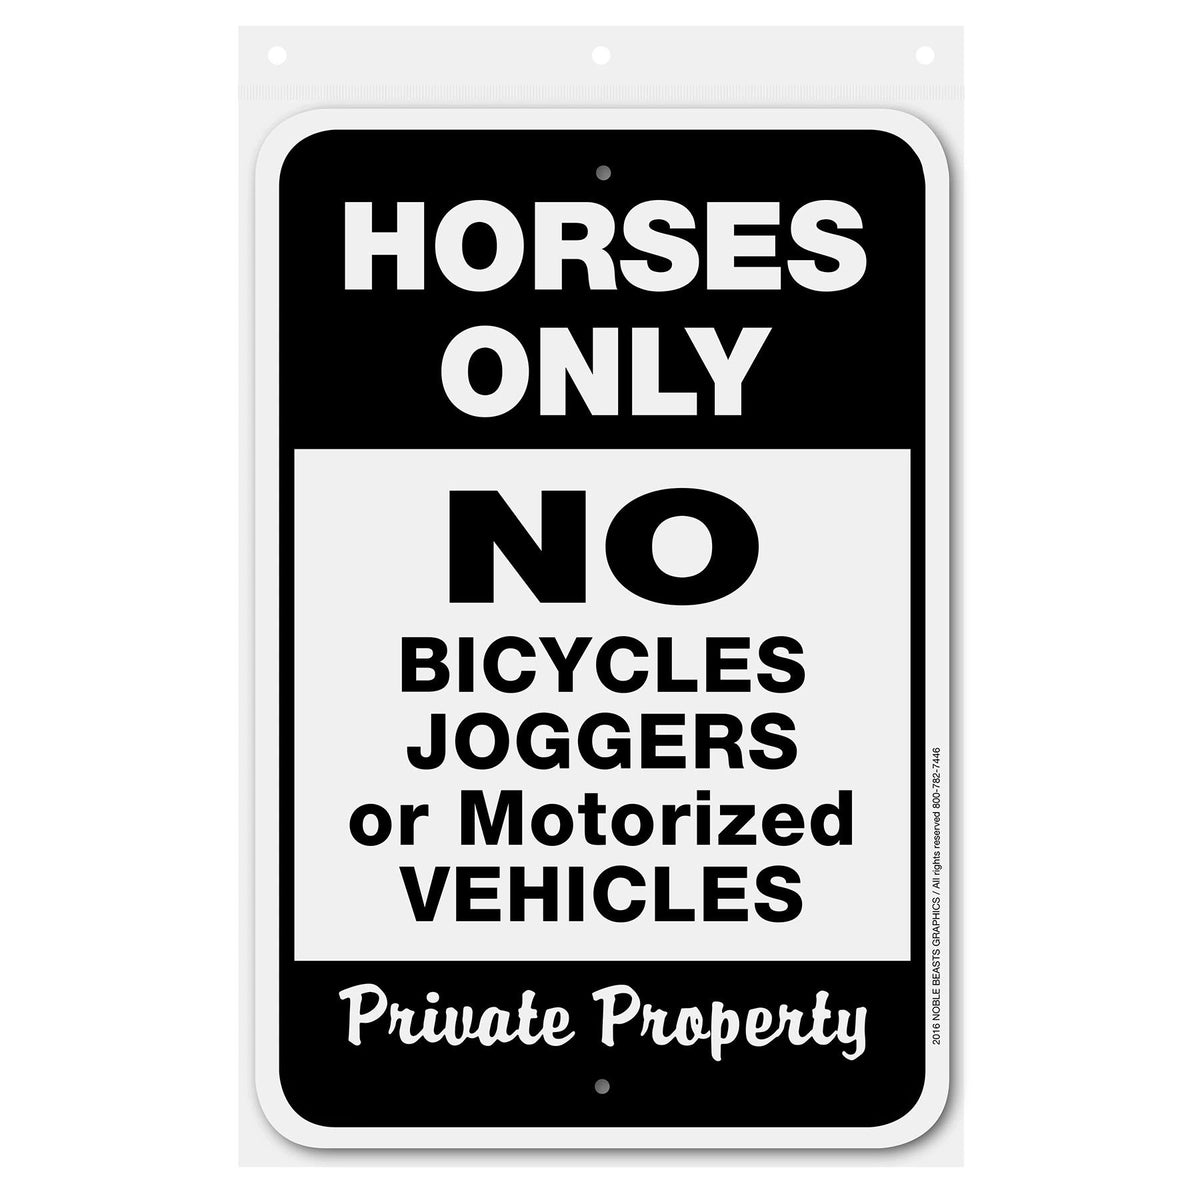 Horses Only No Bicycles Joggers or Motorized Vehicles Sign Aluminum 12 in x 18 in #146743